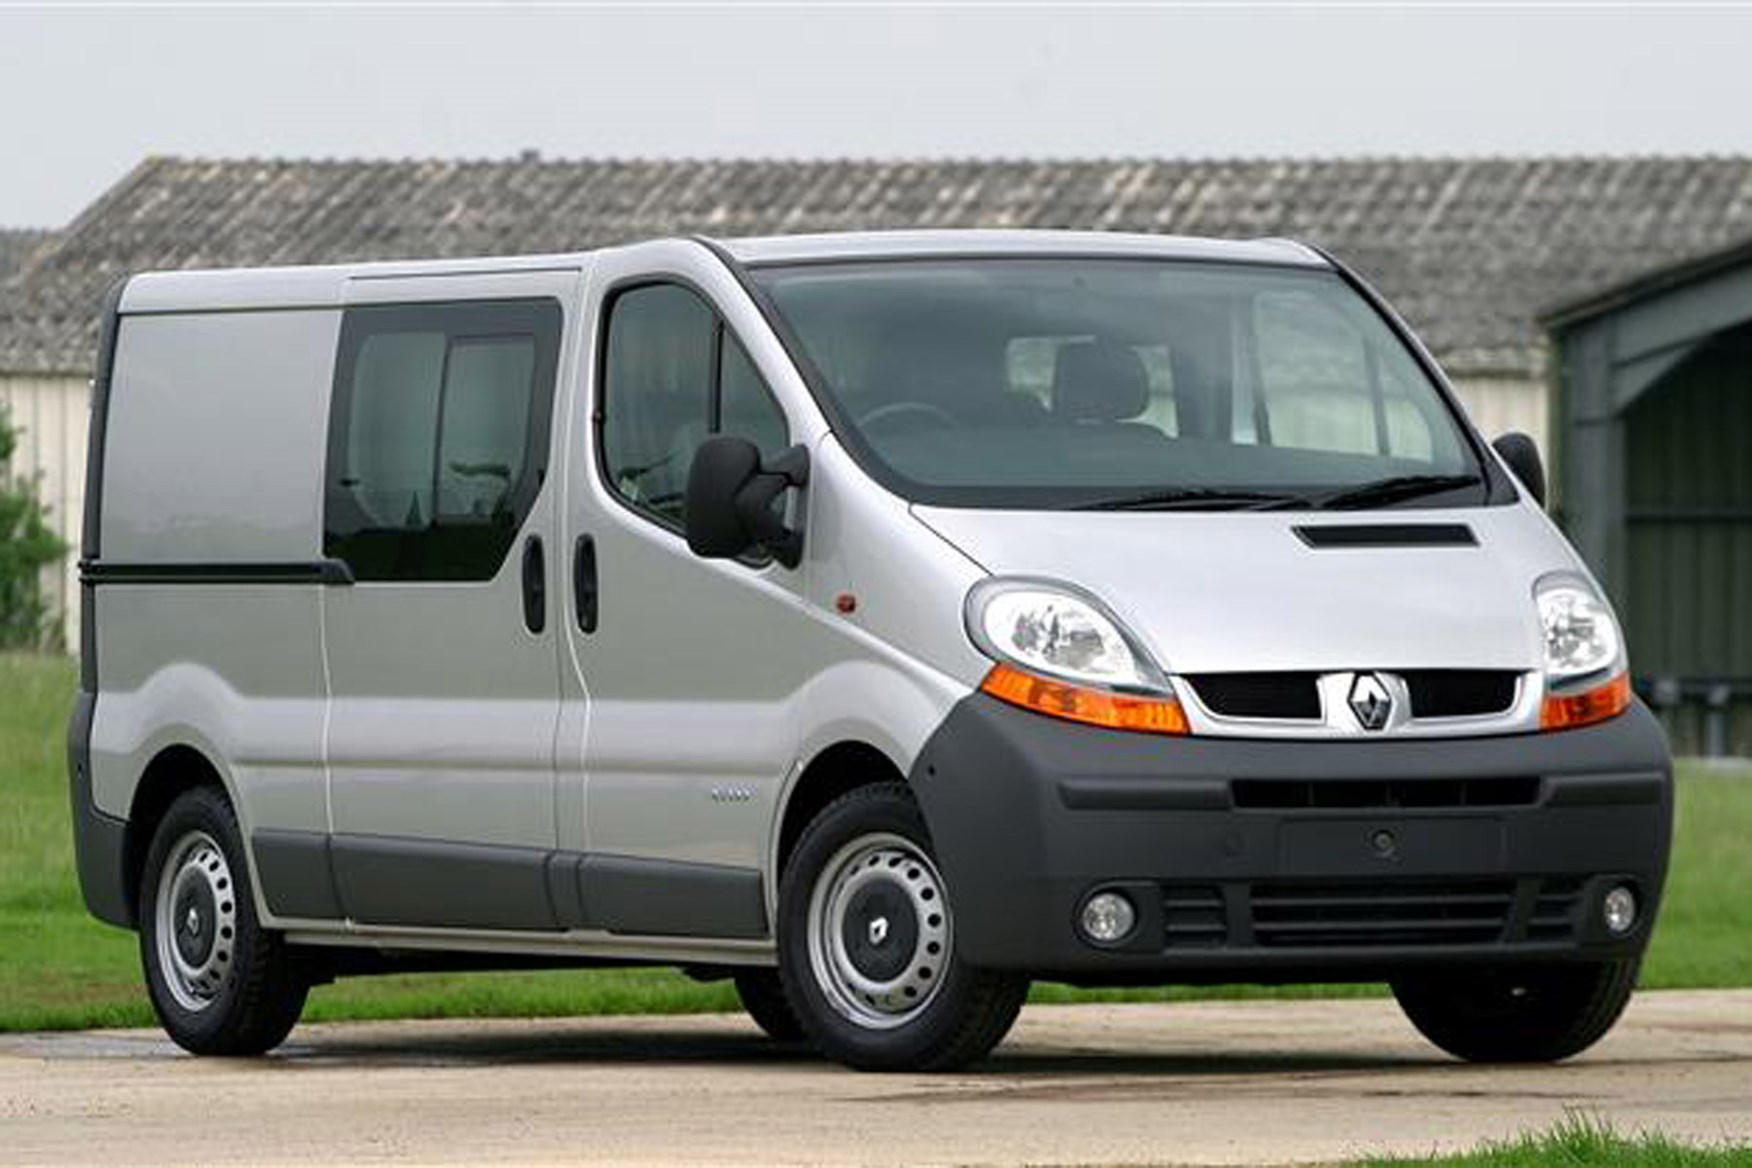 Renault Trafic 2001-2014 review on Parkers Vans - front exterior